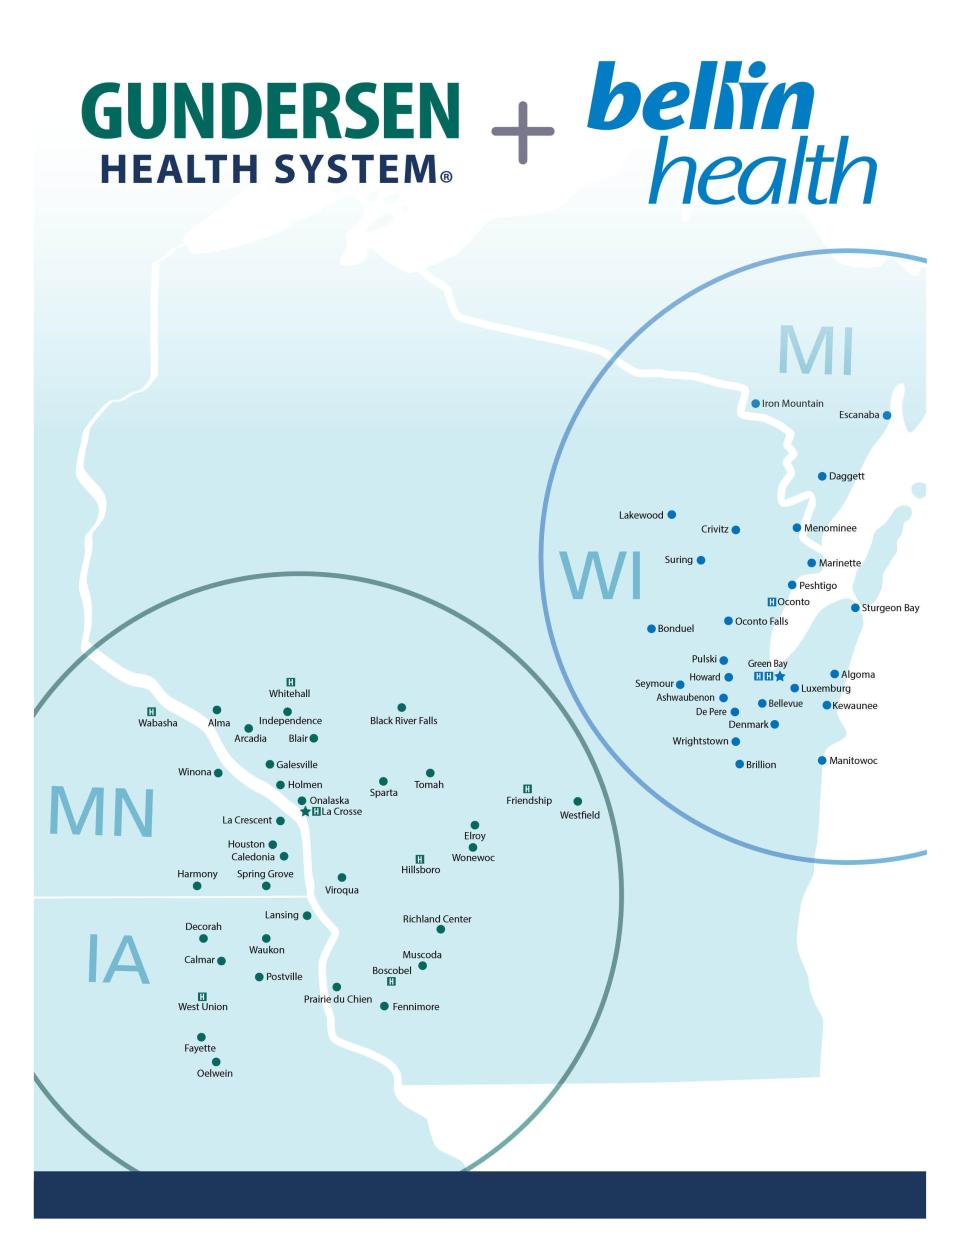 Gundersen Health System and Bellin Health will merge operations. Combined, the two health care providers serve parts of Wisconsin, Michigan, Minnesota and Iowa.